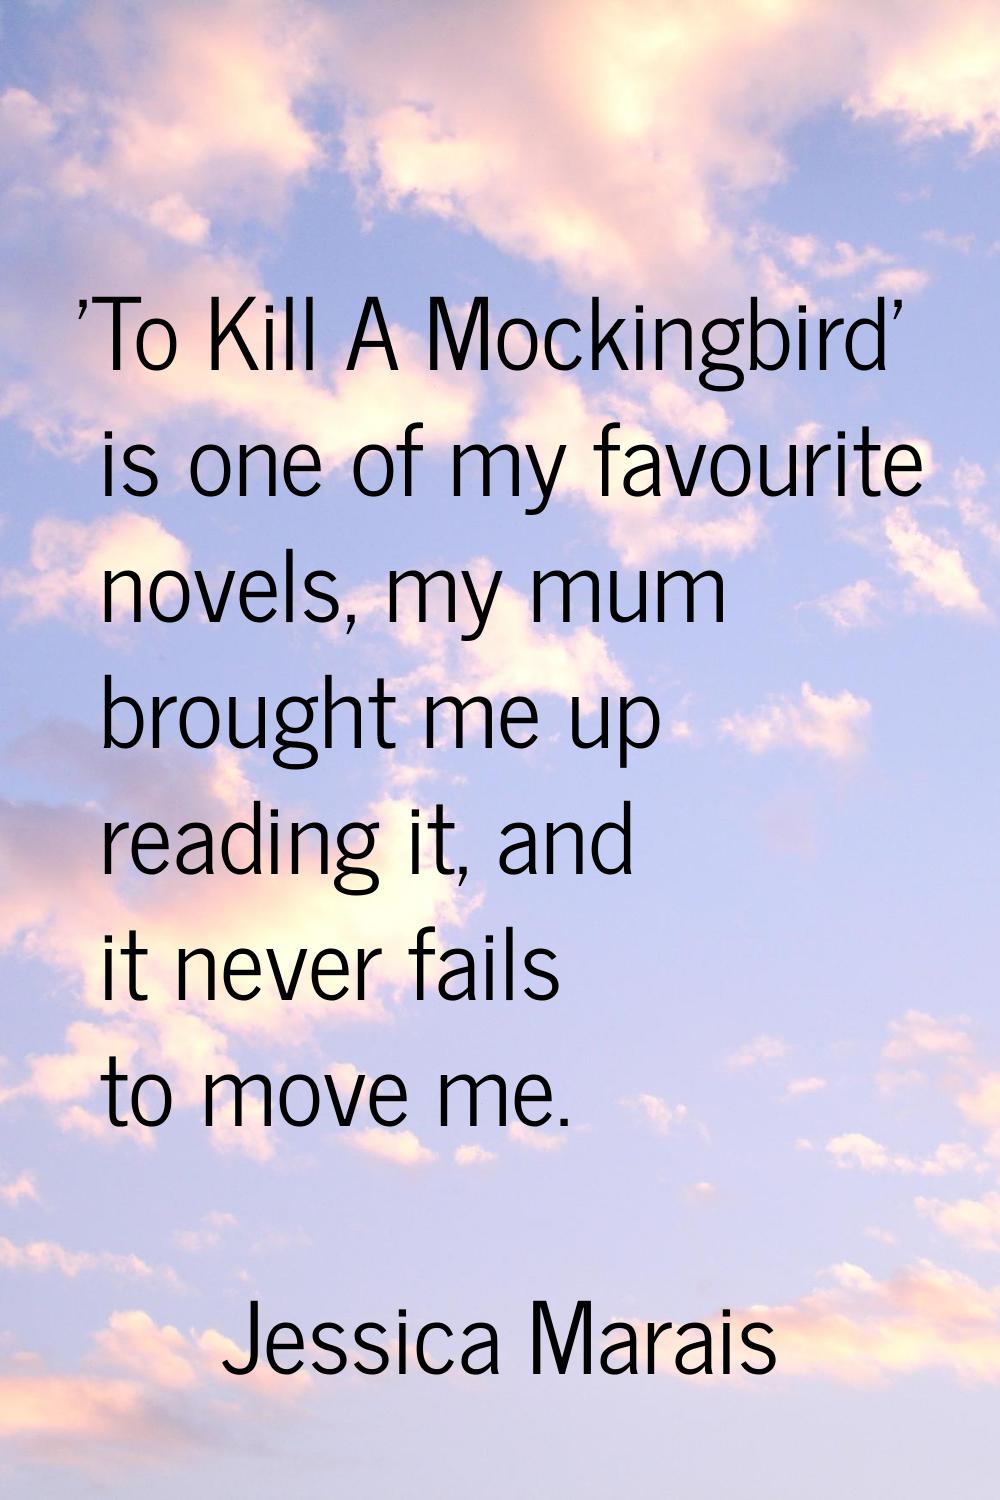 'To Kill A Mockingbird' is one of my favourite novels, my mum brought me up reading it, and it neve